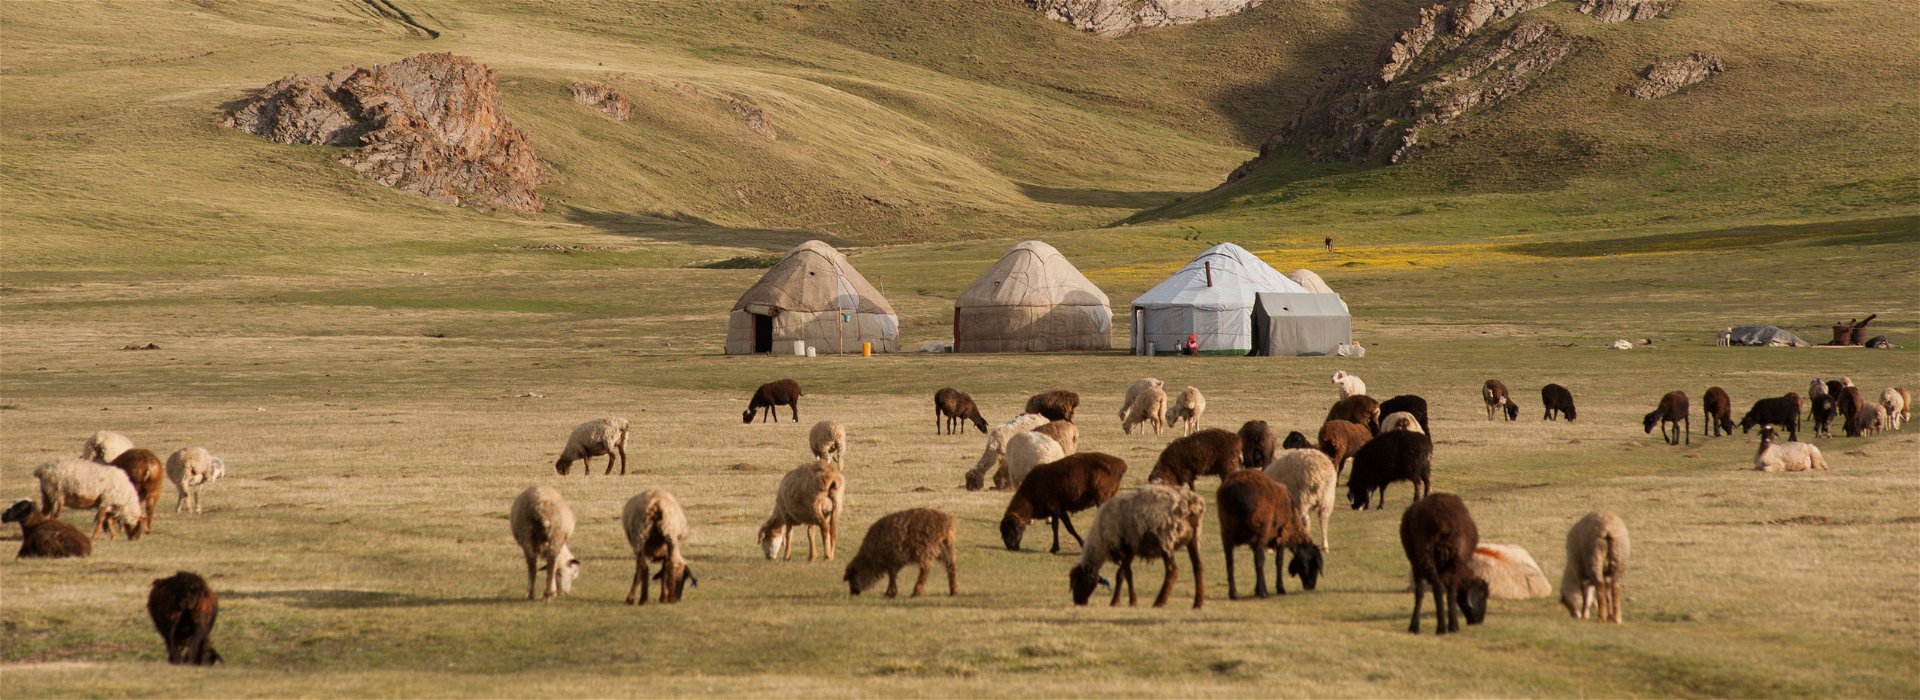 Understanding the Stans: exploring Central Asia